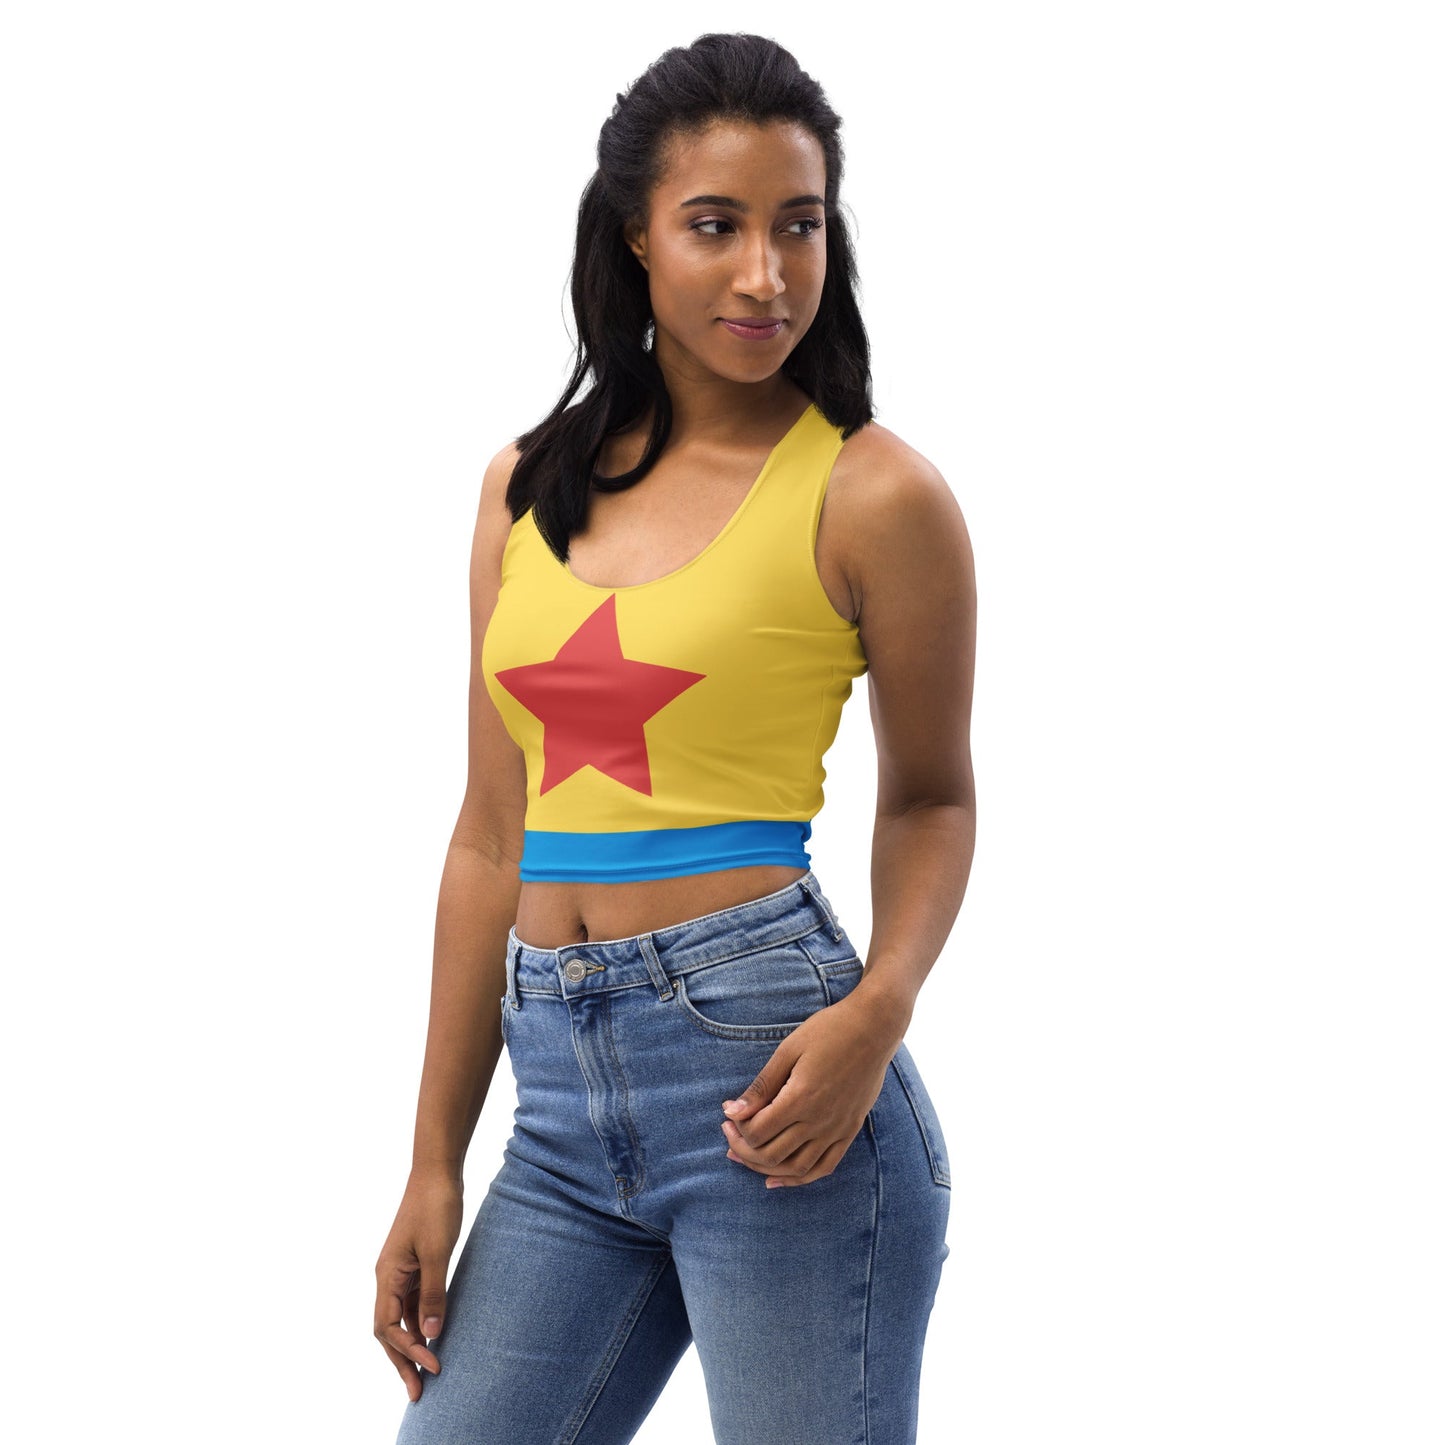 Cartoon Ball Crop Top active wearboo to youcartoon style#tag4##tag5##tag6#